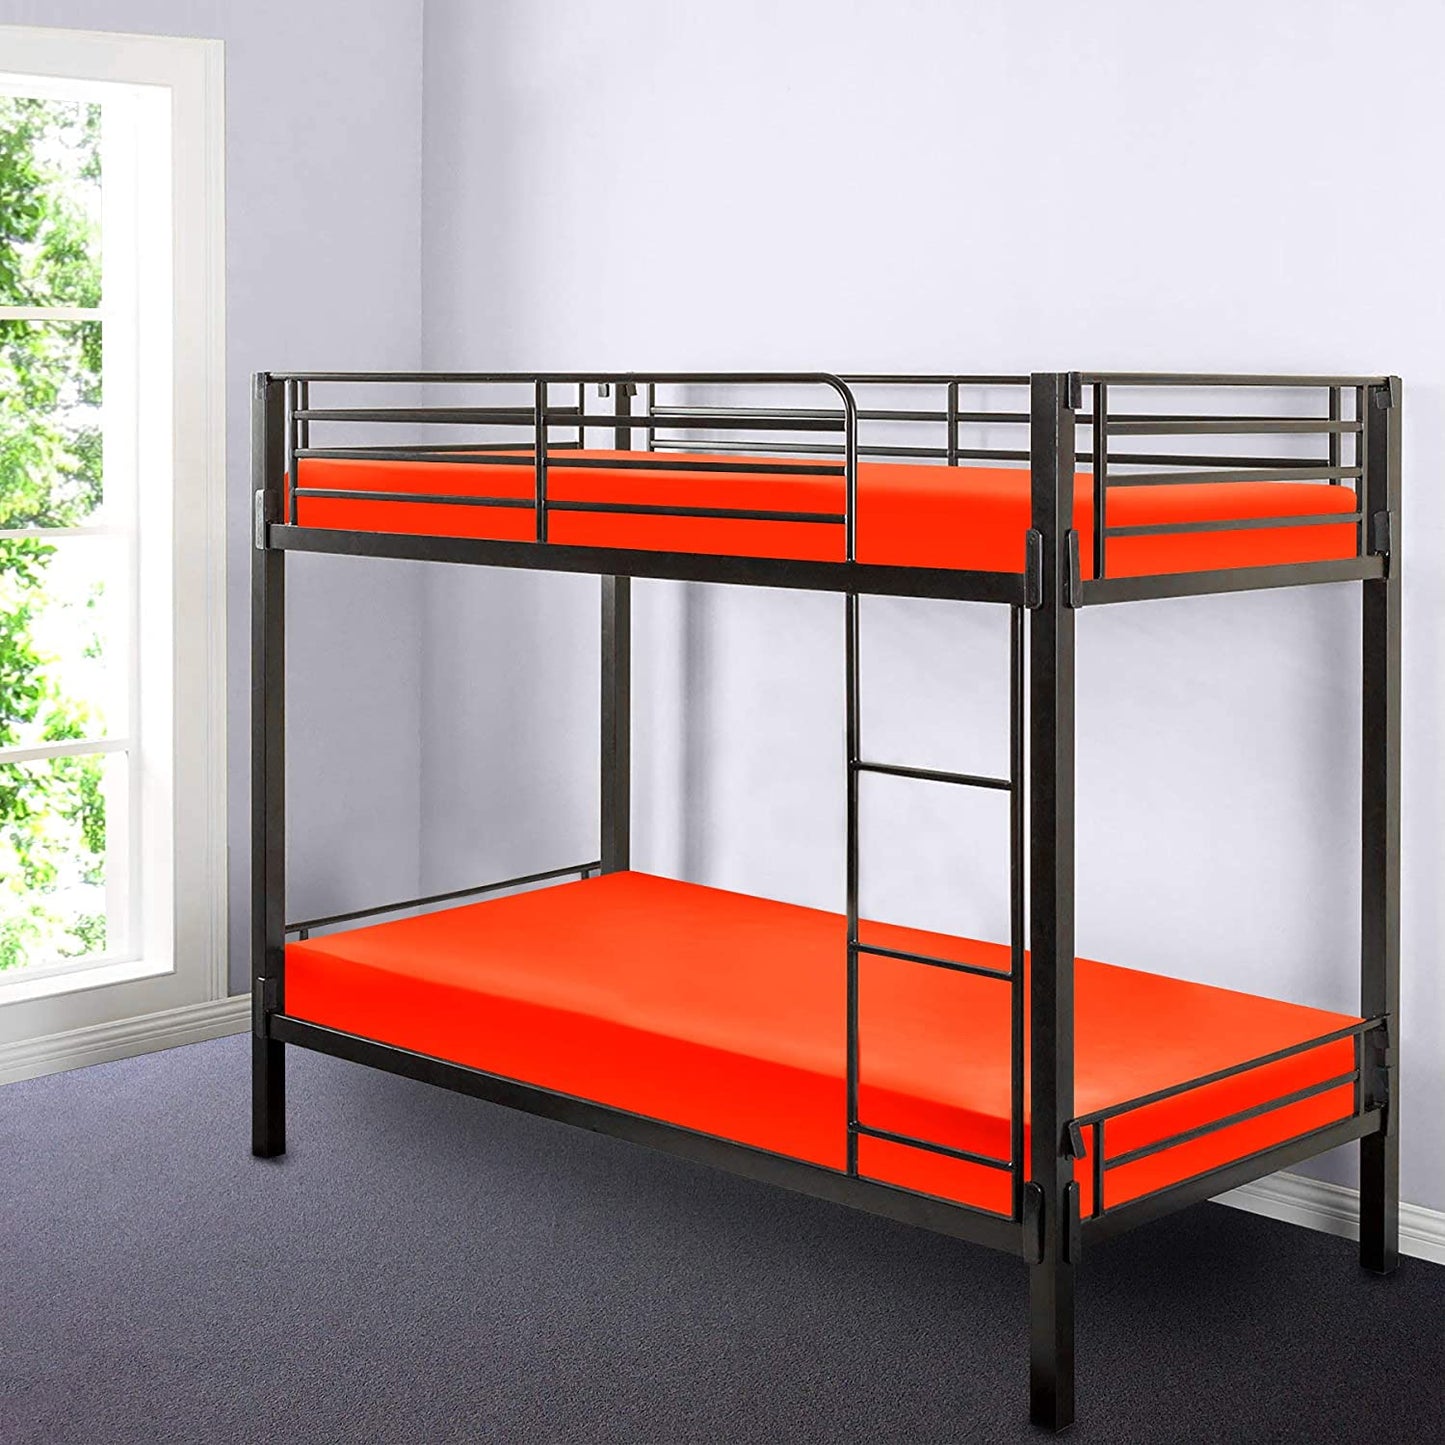 Gilbins Cot Size 30" x 75" Fitted Sheet, Made of Ultra Soft Cotton, Perfect for Camp Bunk Beds / RVs / Guest Beds Orange